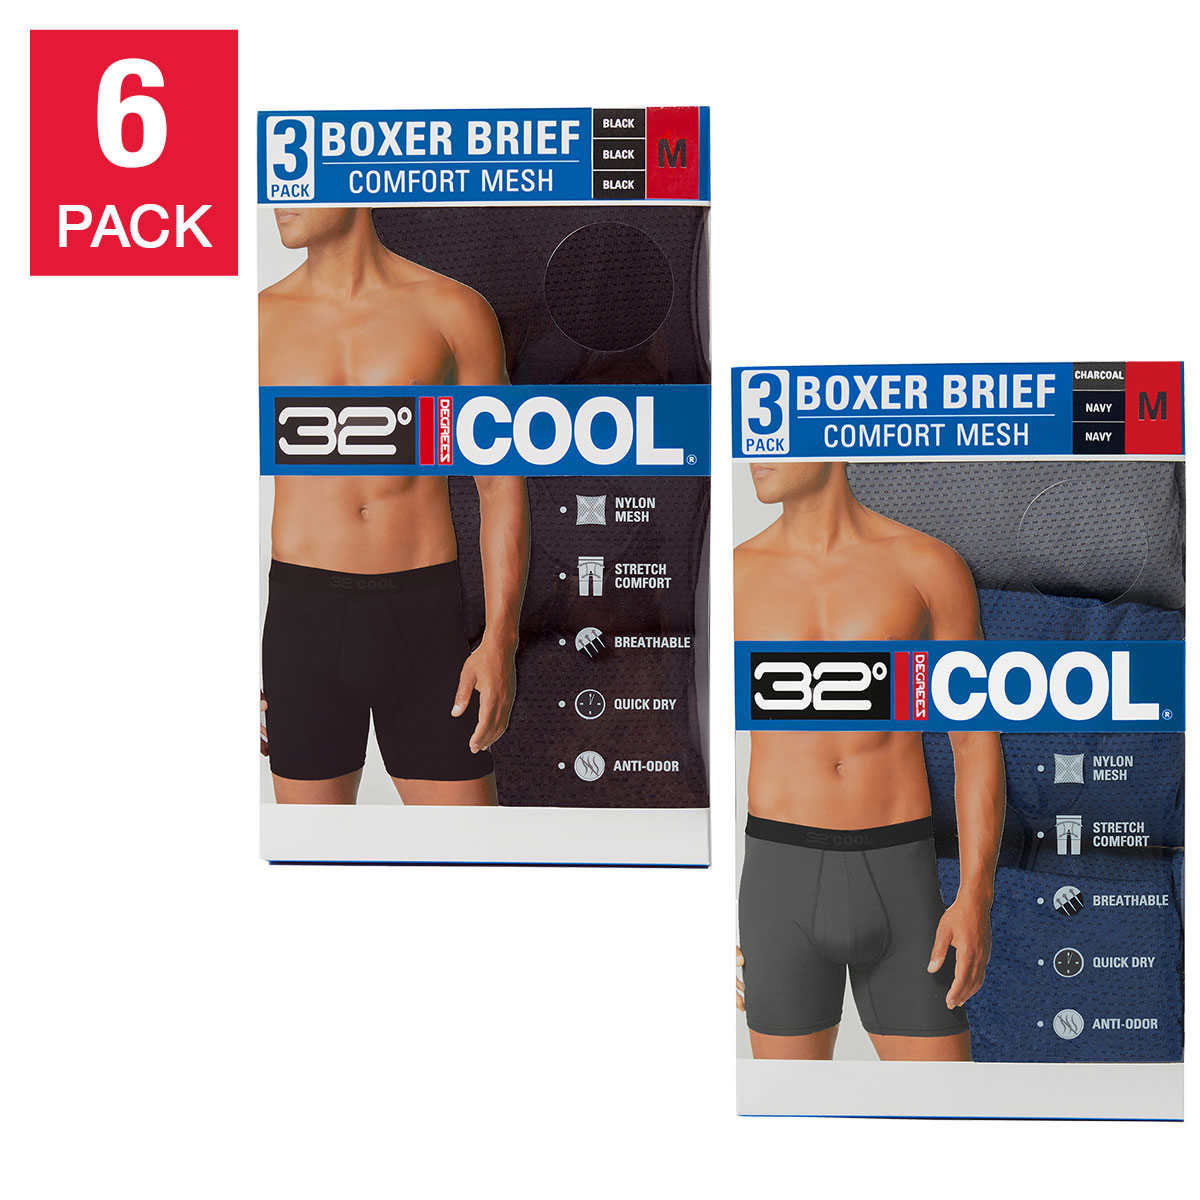 Costco 32 Degrees Men's Comfort Mesh Boxer Brief, 6-pack - $20.99 shipping included